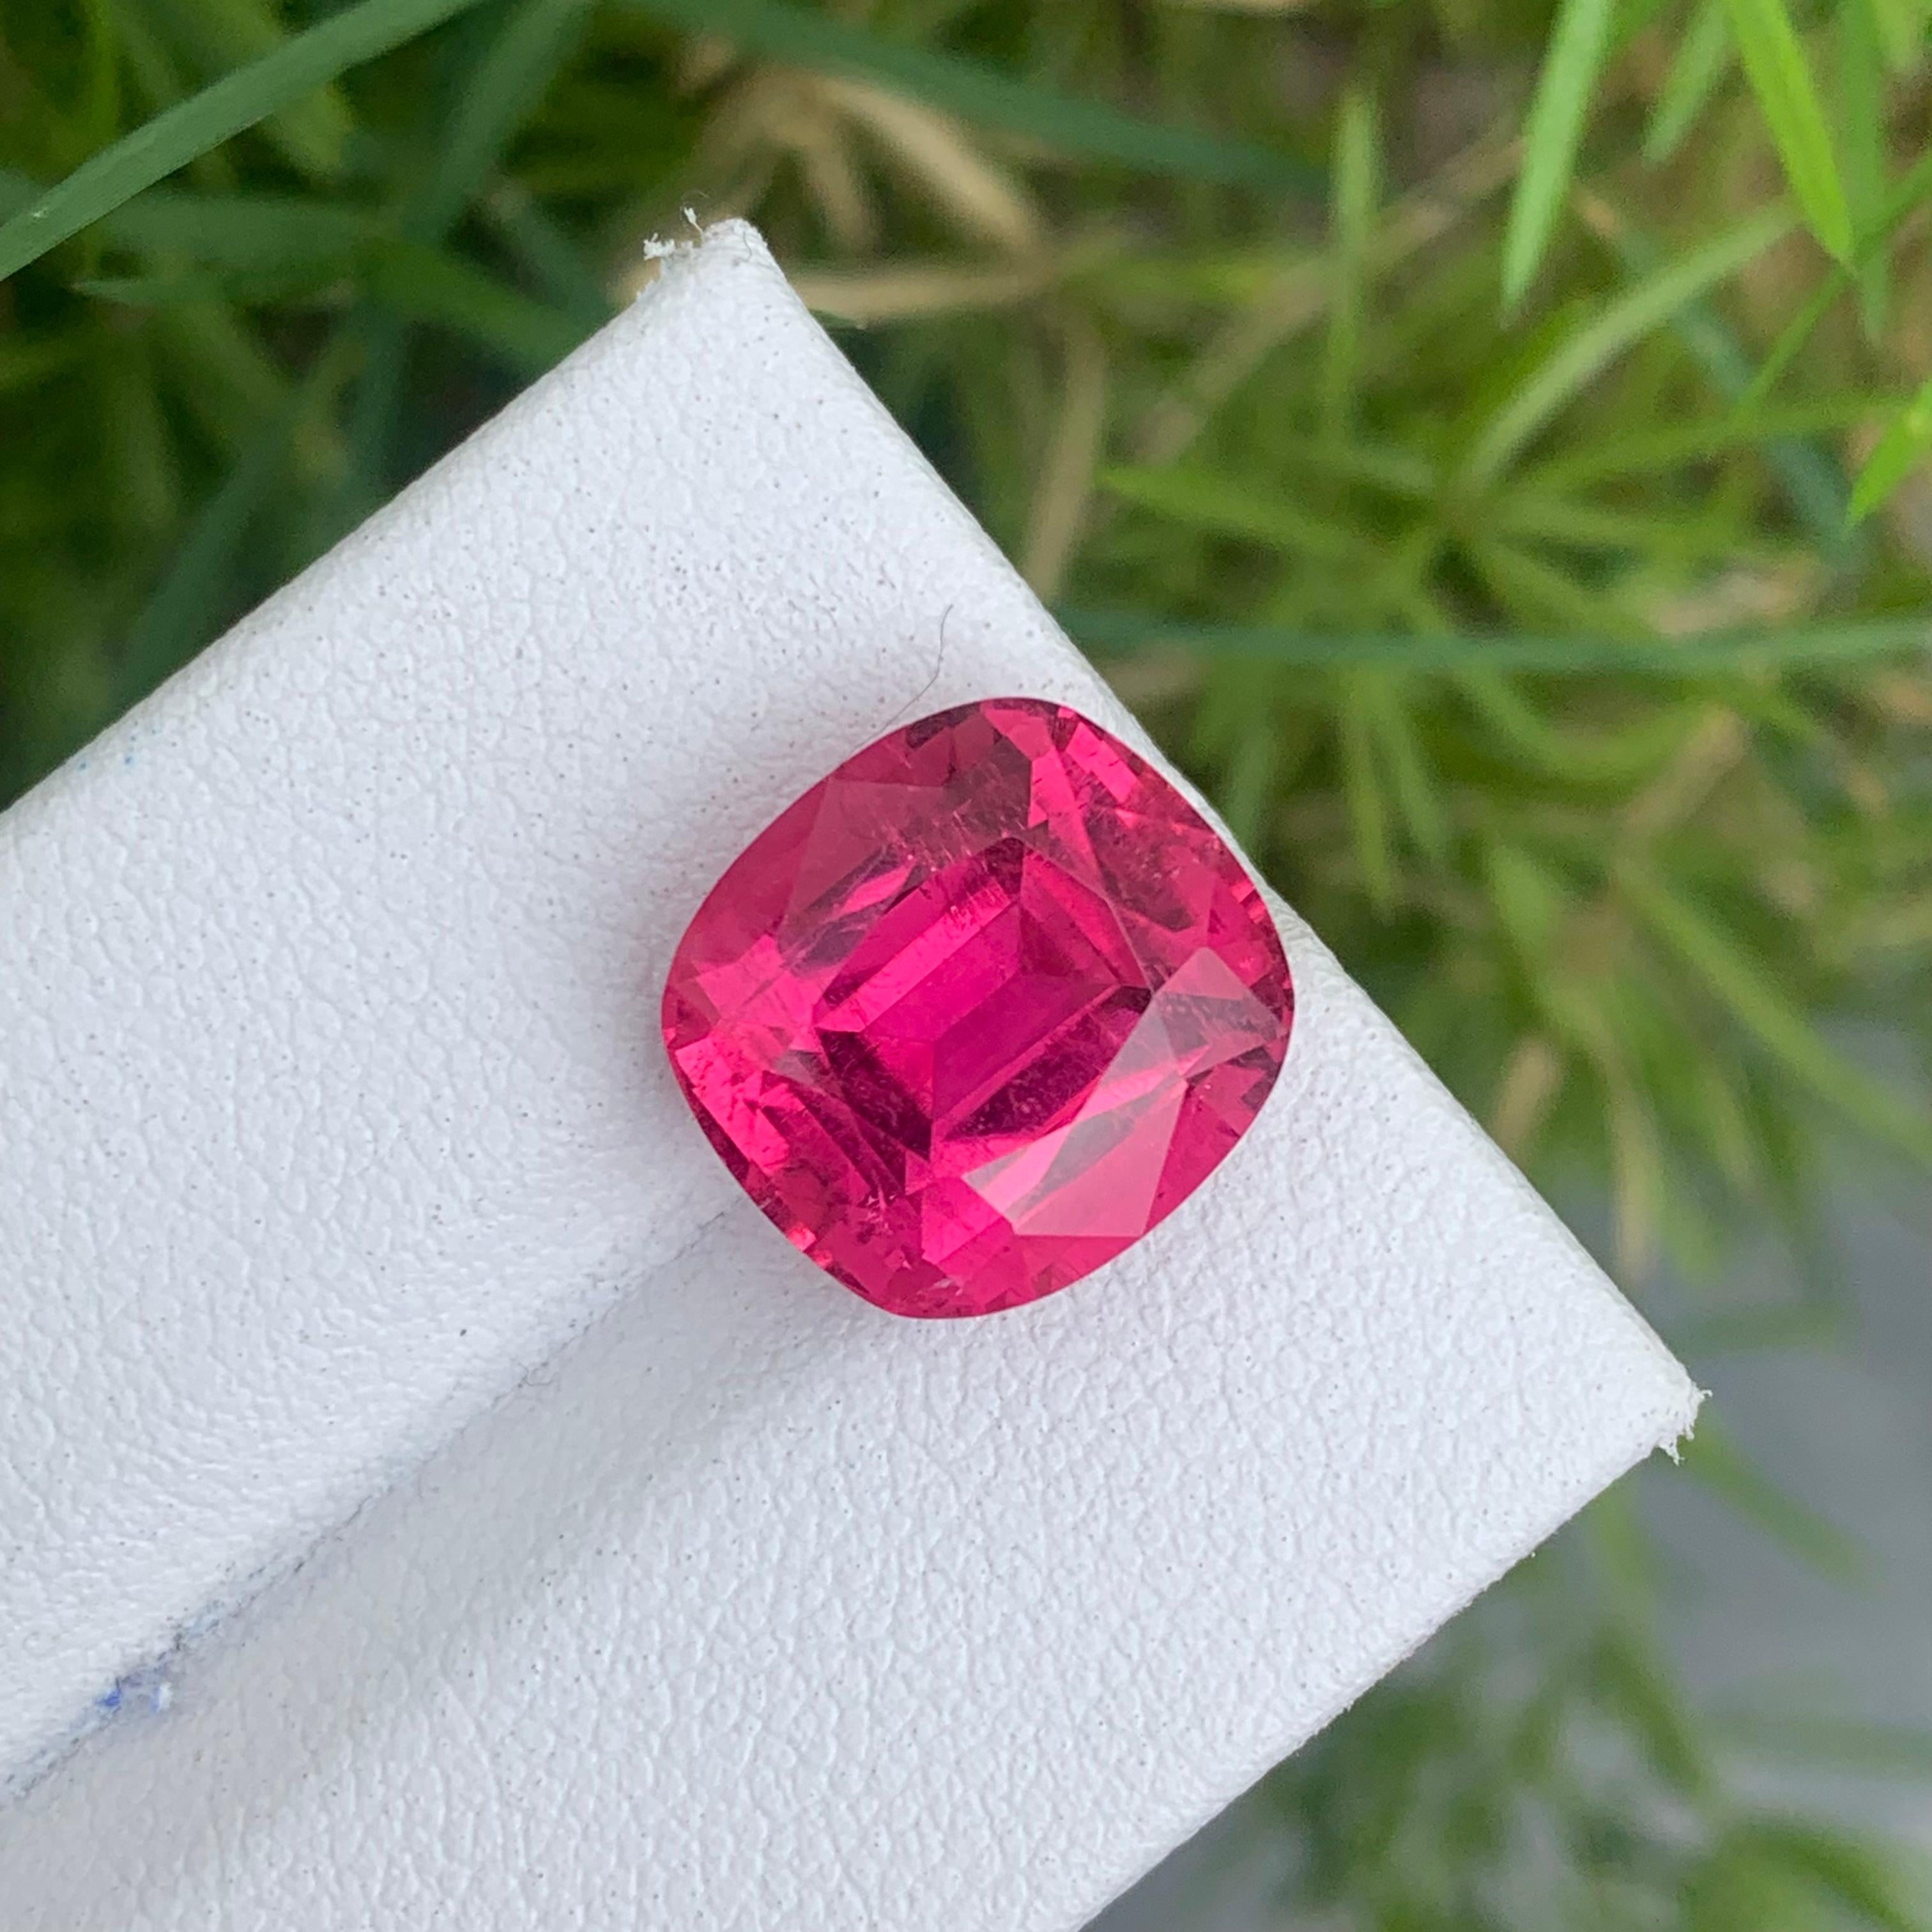 Gemstone Type :  Rubellite Tourmaline
Weight : 7.45 Carats
Dimensions : 12.1x11.4x7.8 Mm
Origin : Afghanistan
Clarity :  SI
Shape: Cushion
Color: Hot Pink
Certificate: On Demand
Rubellites are tourmalines with reasonably saturated dark pink to red